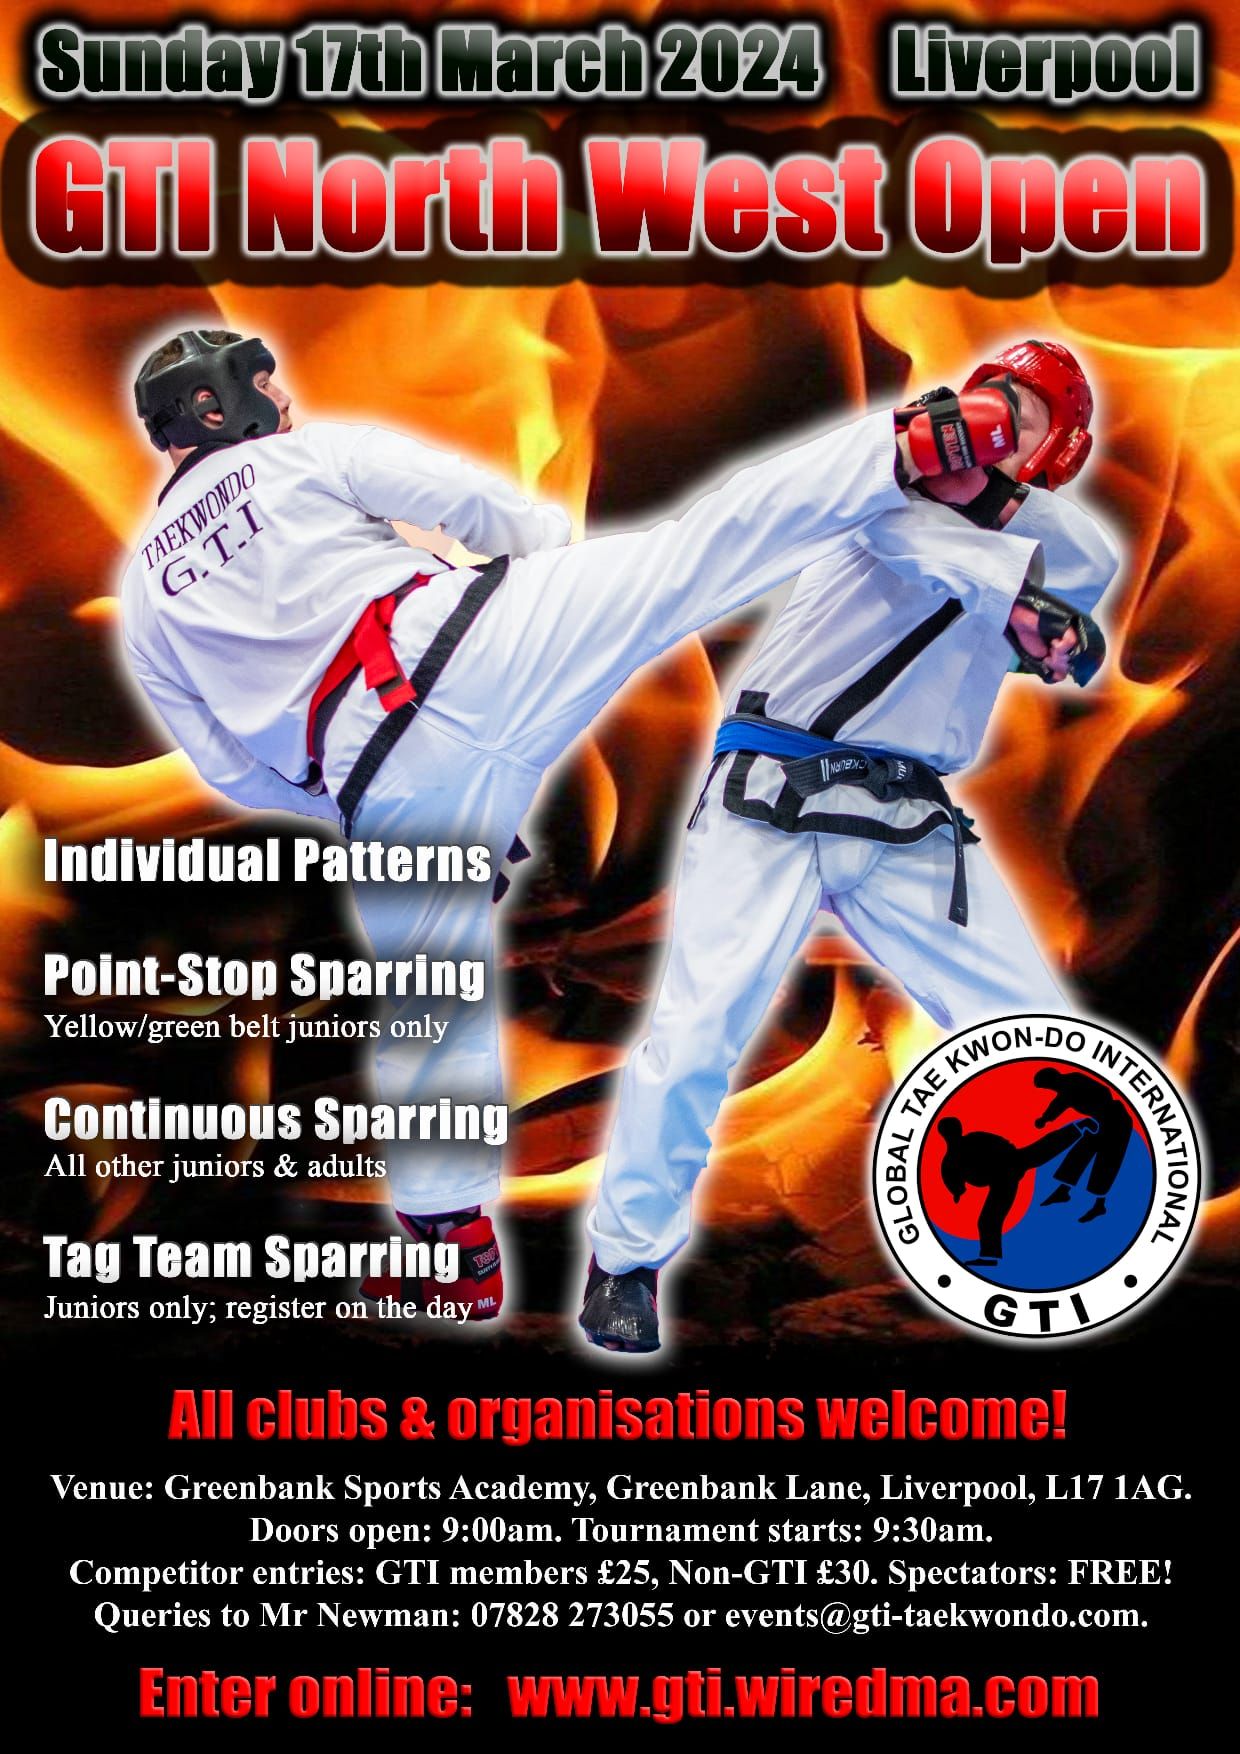 Poster for GTI North West Open 2024